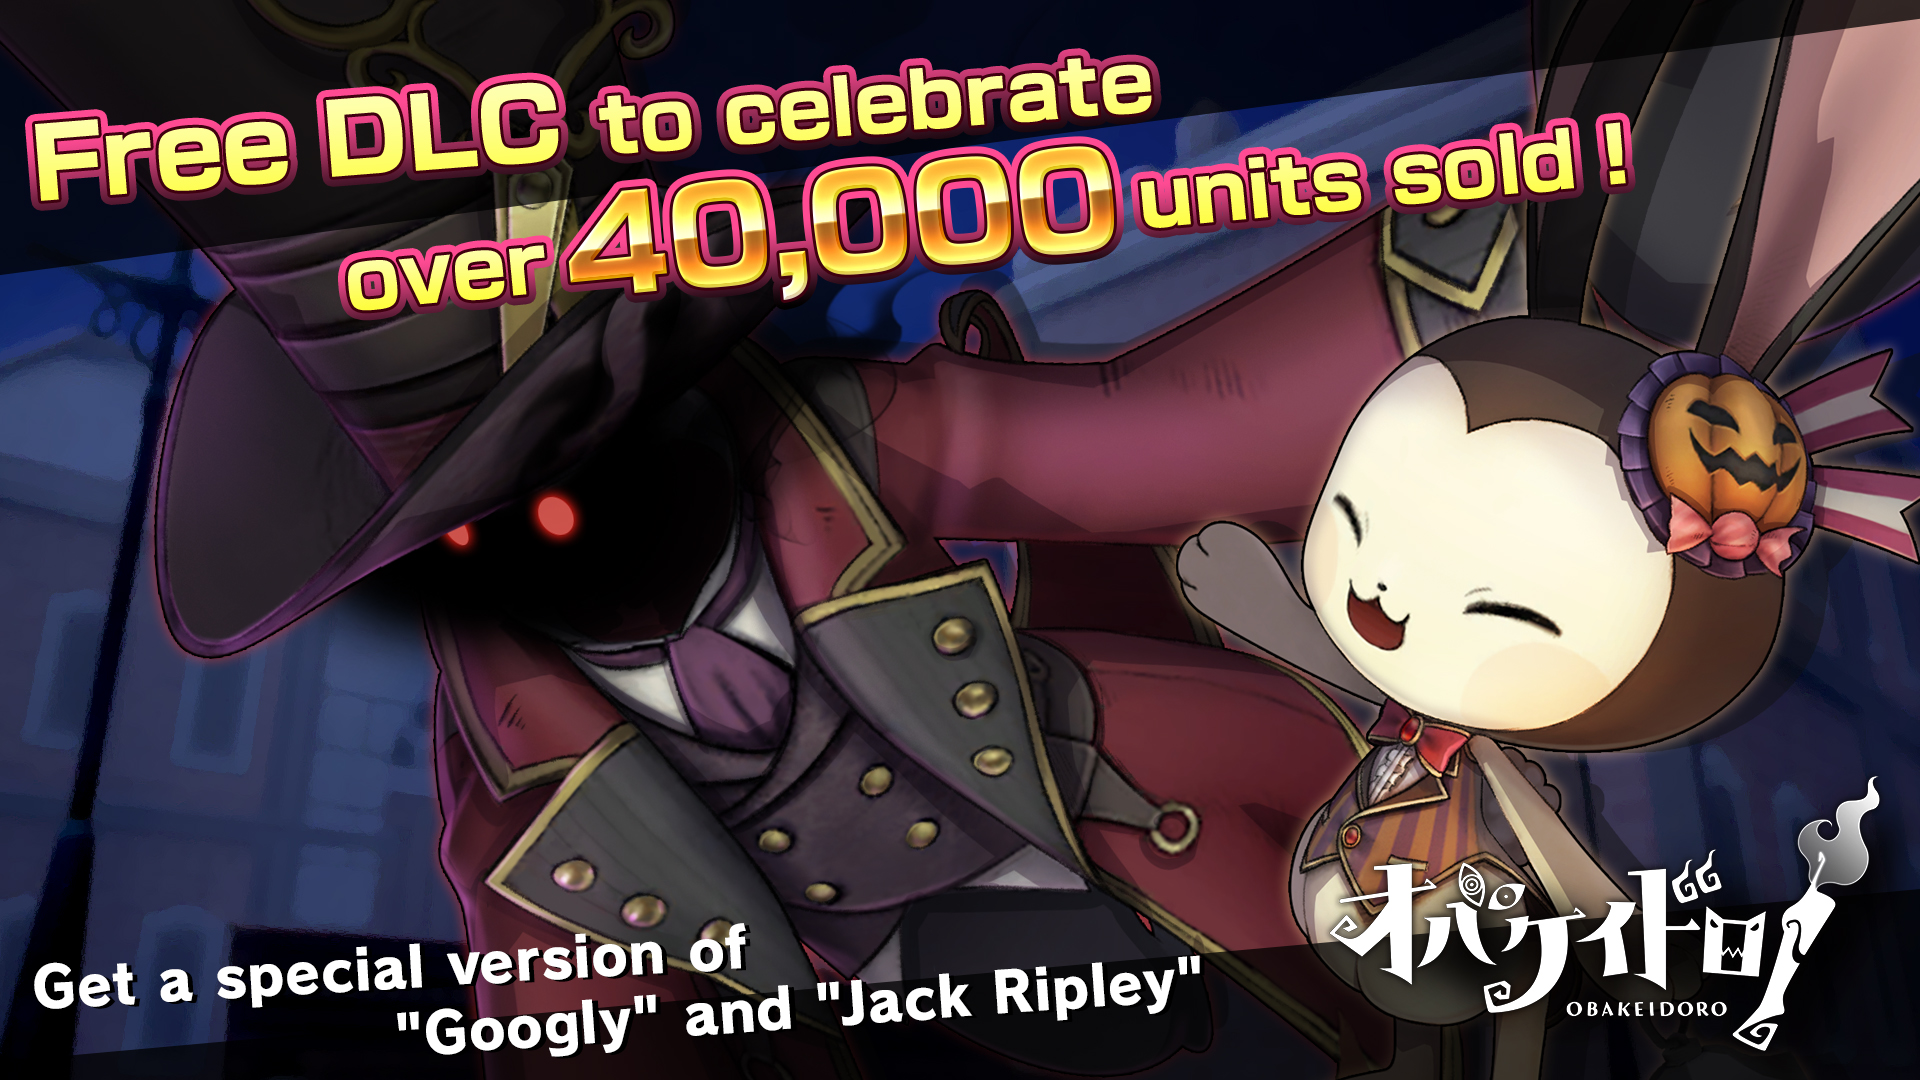 Free DLC to celebrate over 40,000 units sold!